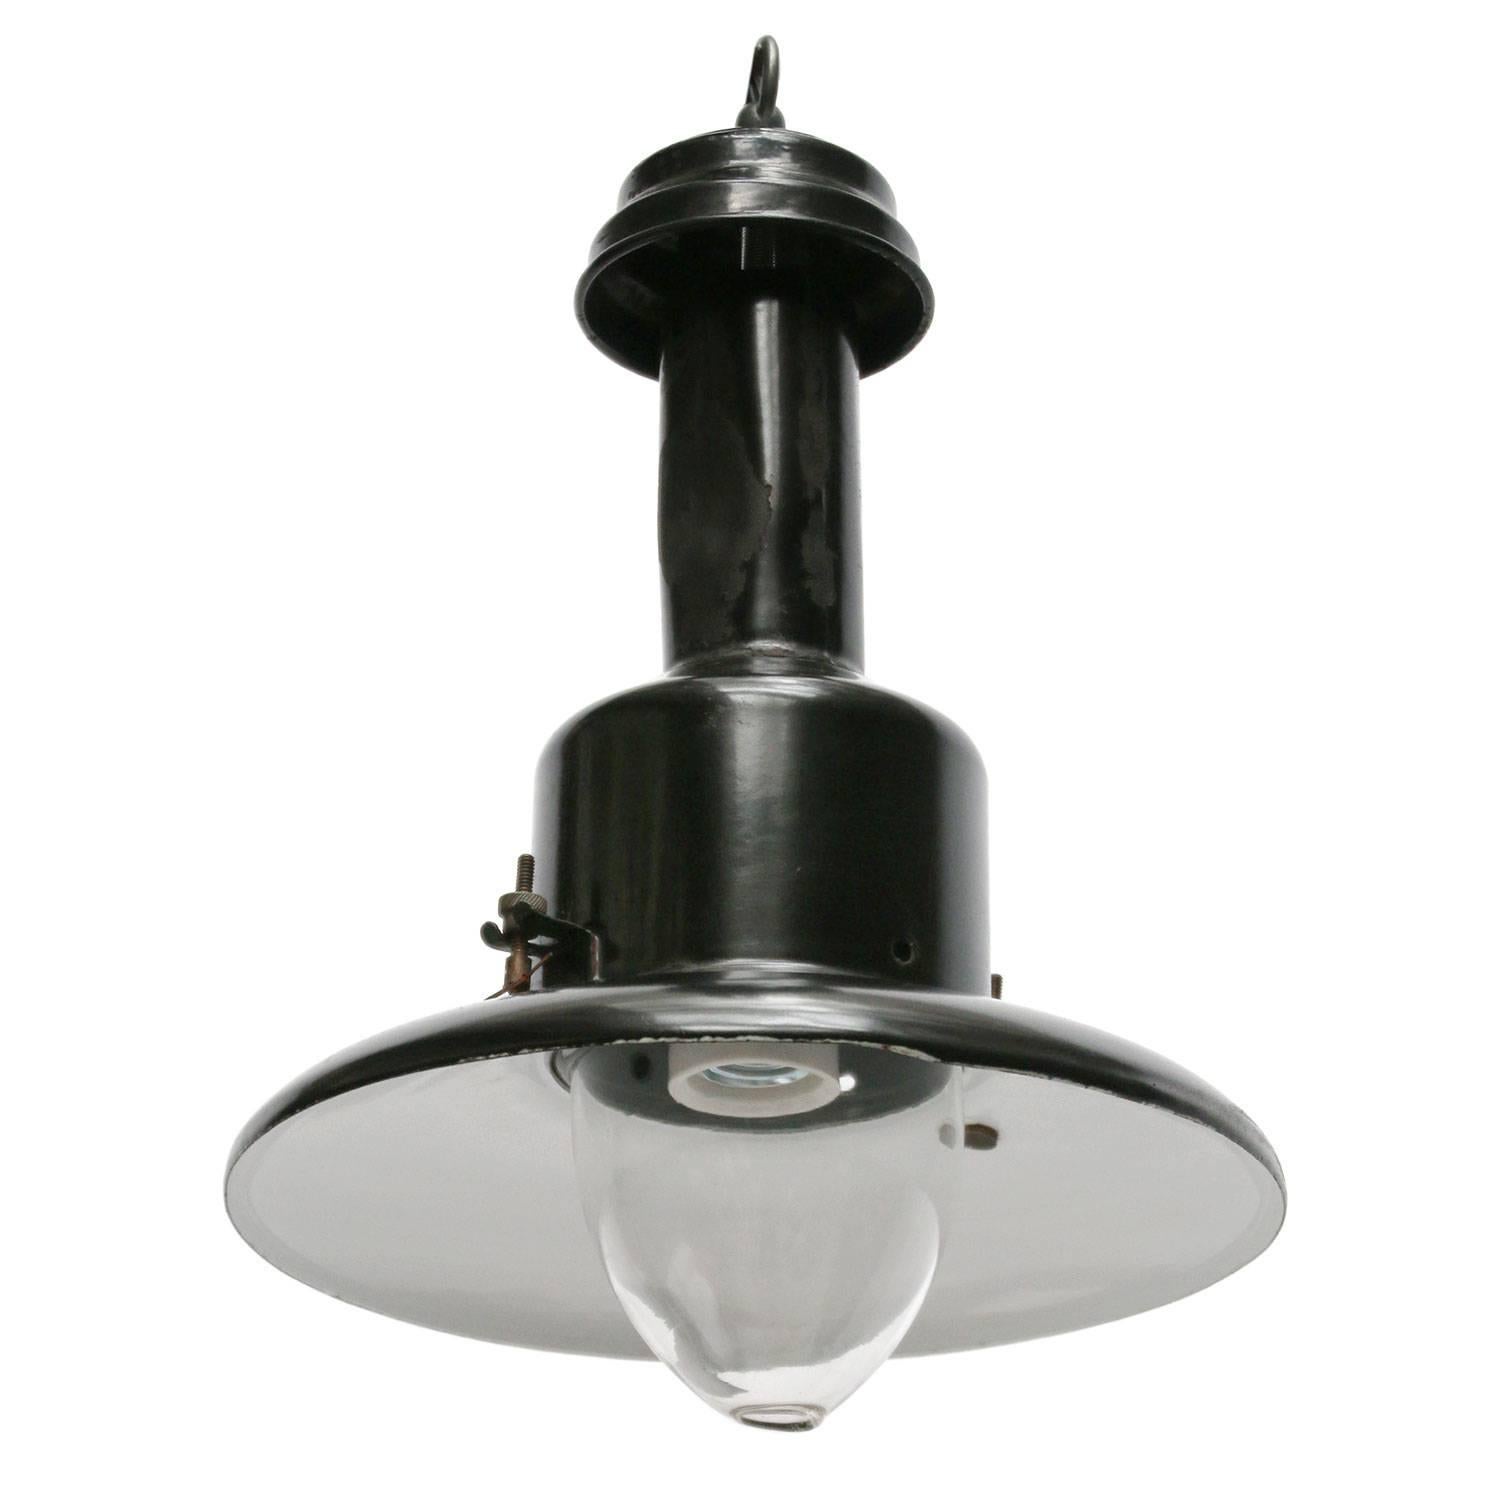 El Greco black 03. Greek fisherman’s light. Black enamel pendant light with clear glass. White interior.

Weight: 1.4 kg / 3.1 lb

All lamps have been made suitable by international standards for incandescent light bulbs, energy-efficient and